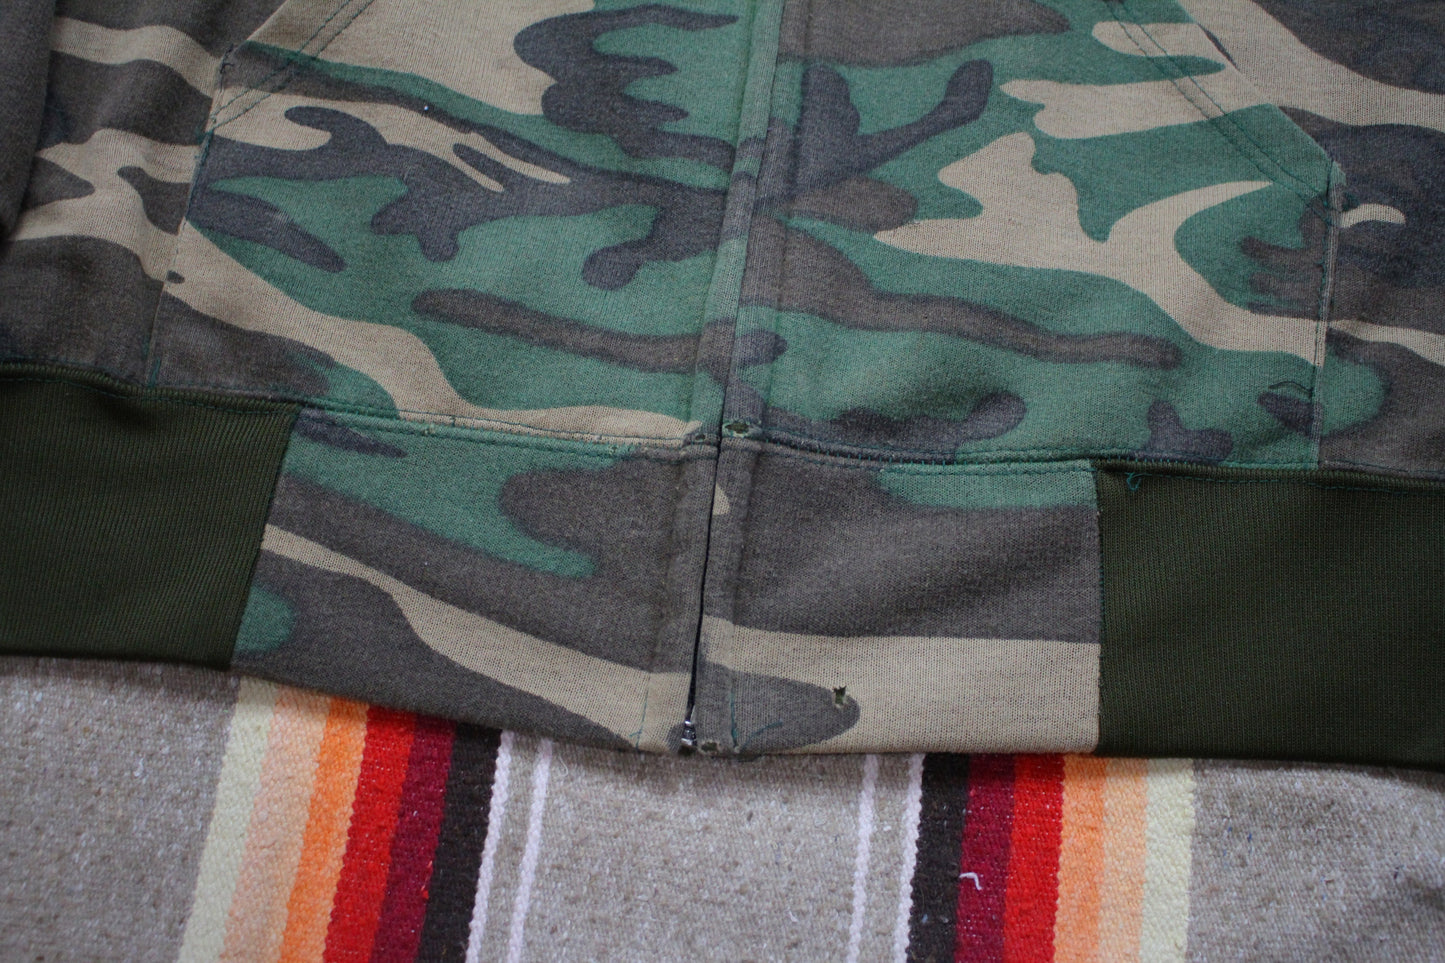 1980s/1990s Ace Sportswear Camo Lightweight Thermal Lined Zip-Up Hoodie Sweatshirt Made in USA Size L